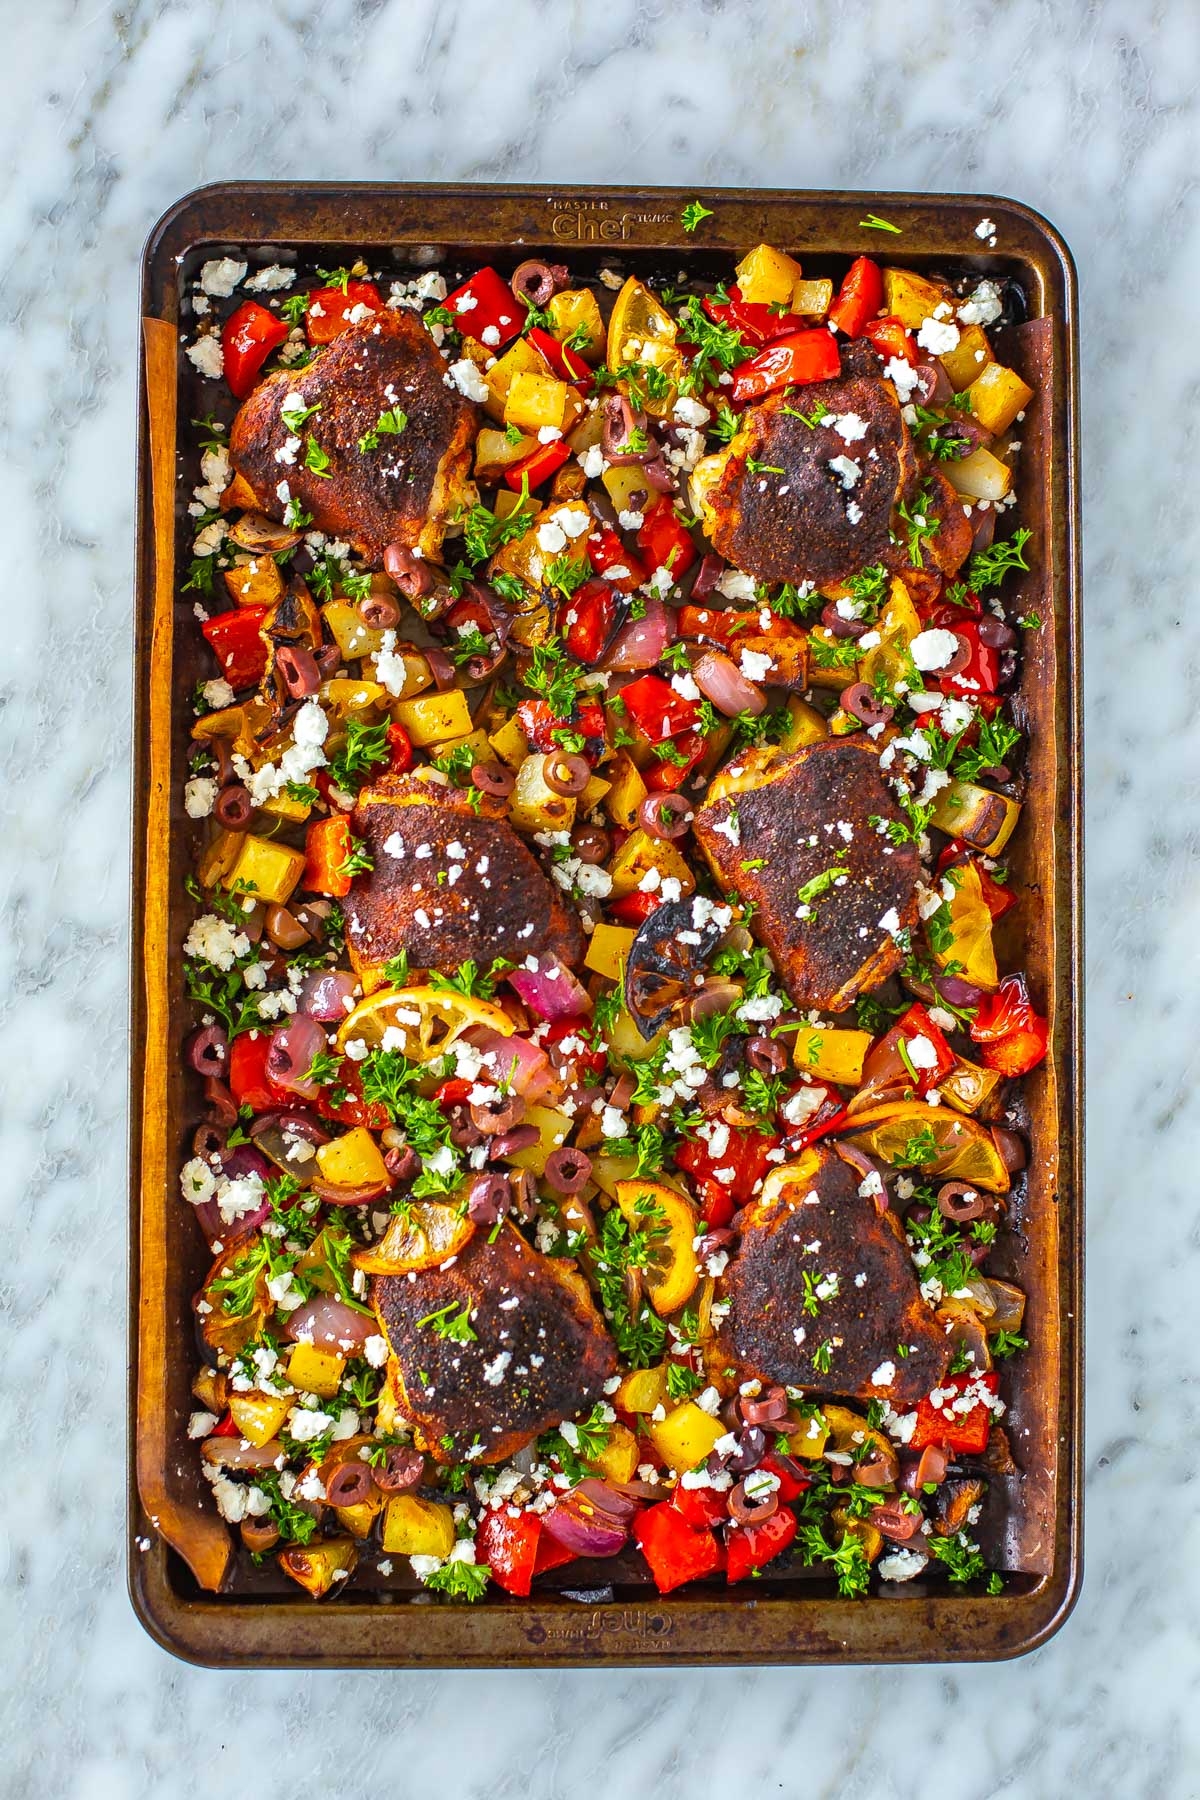 A sheet pan of baked chicken thighs and vegetables.